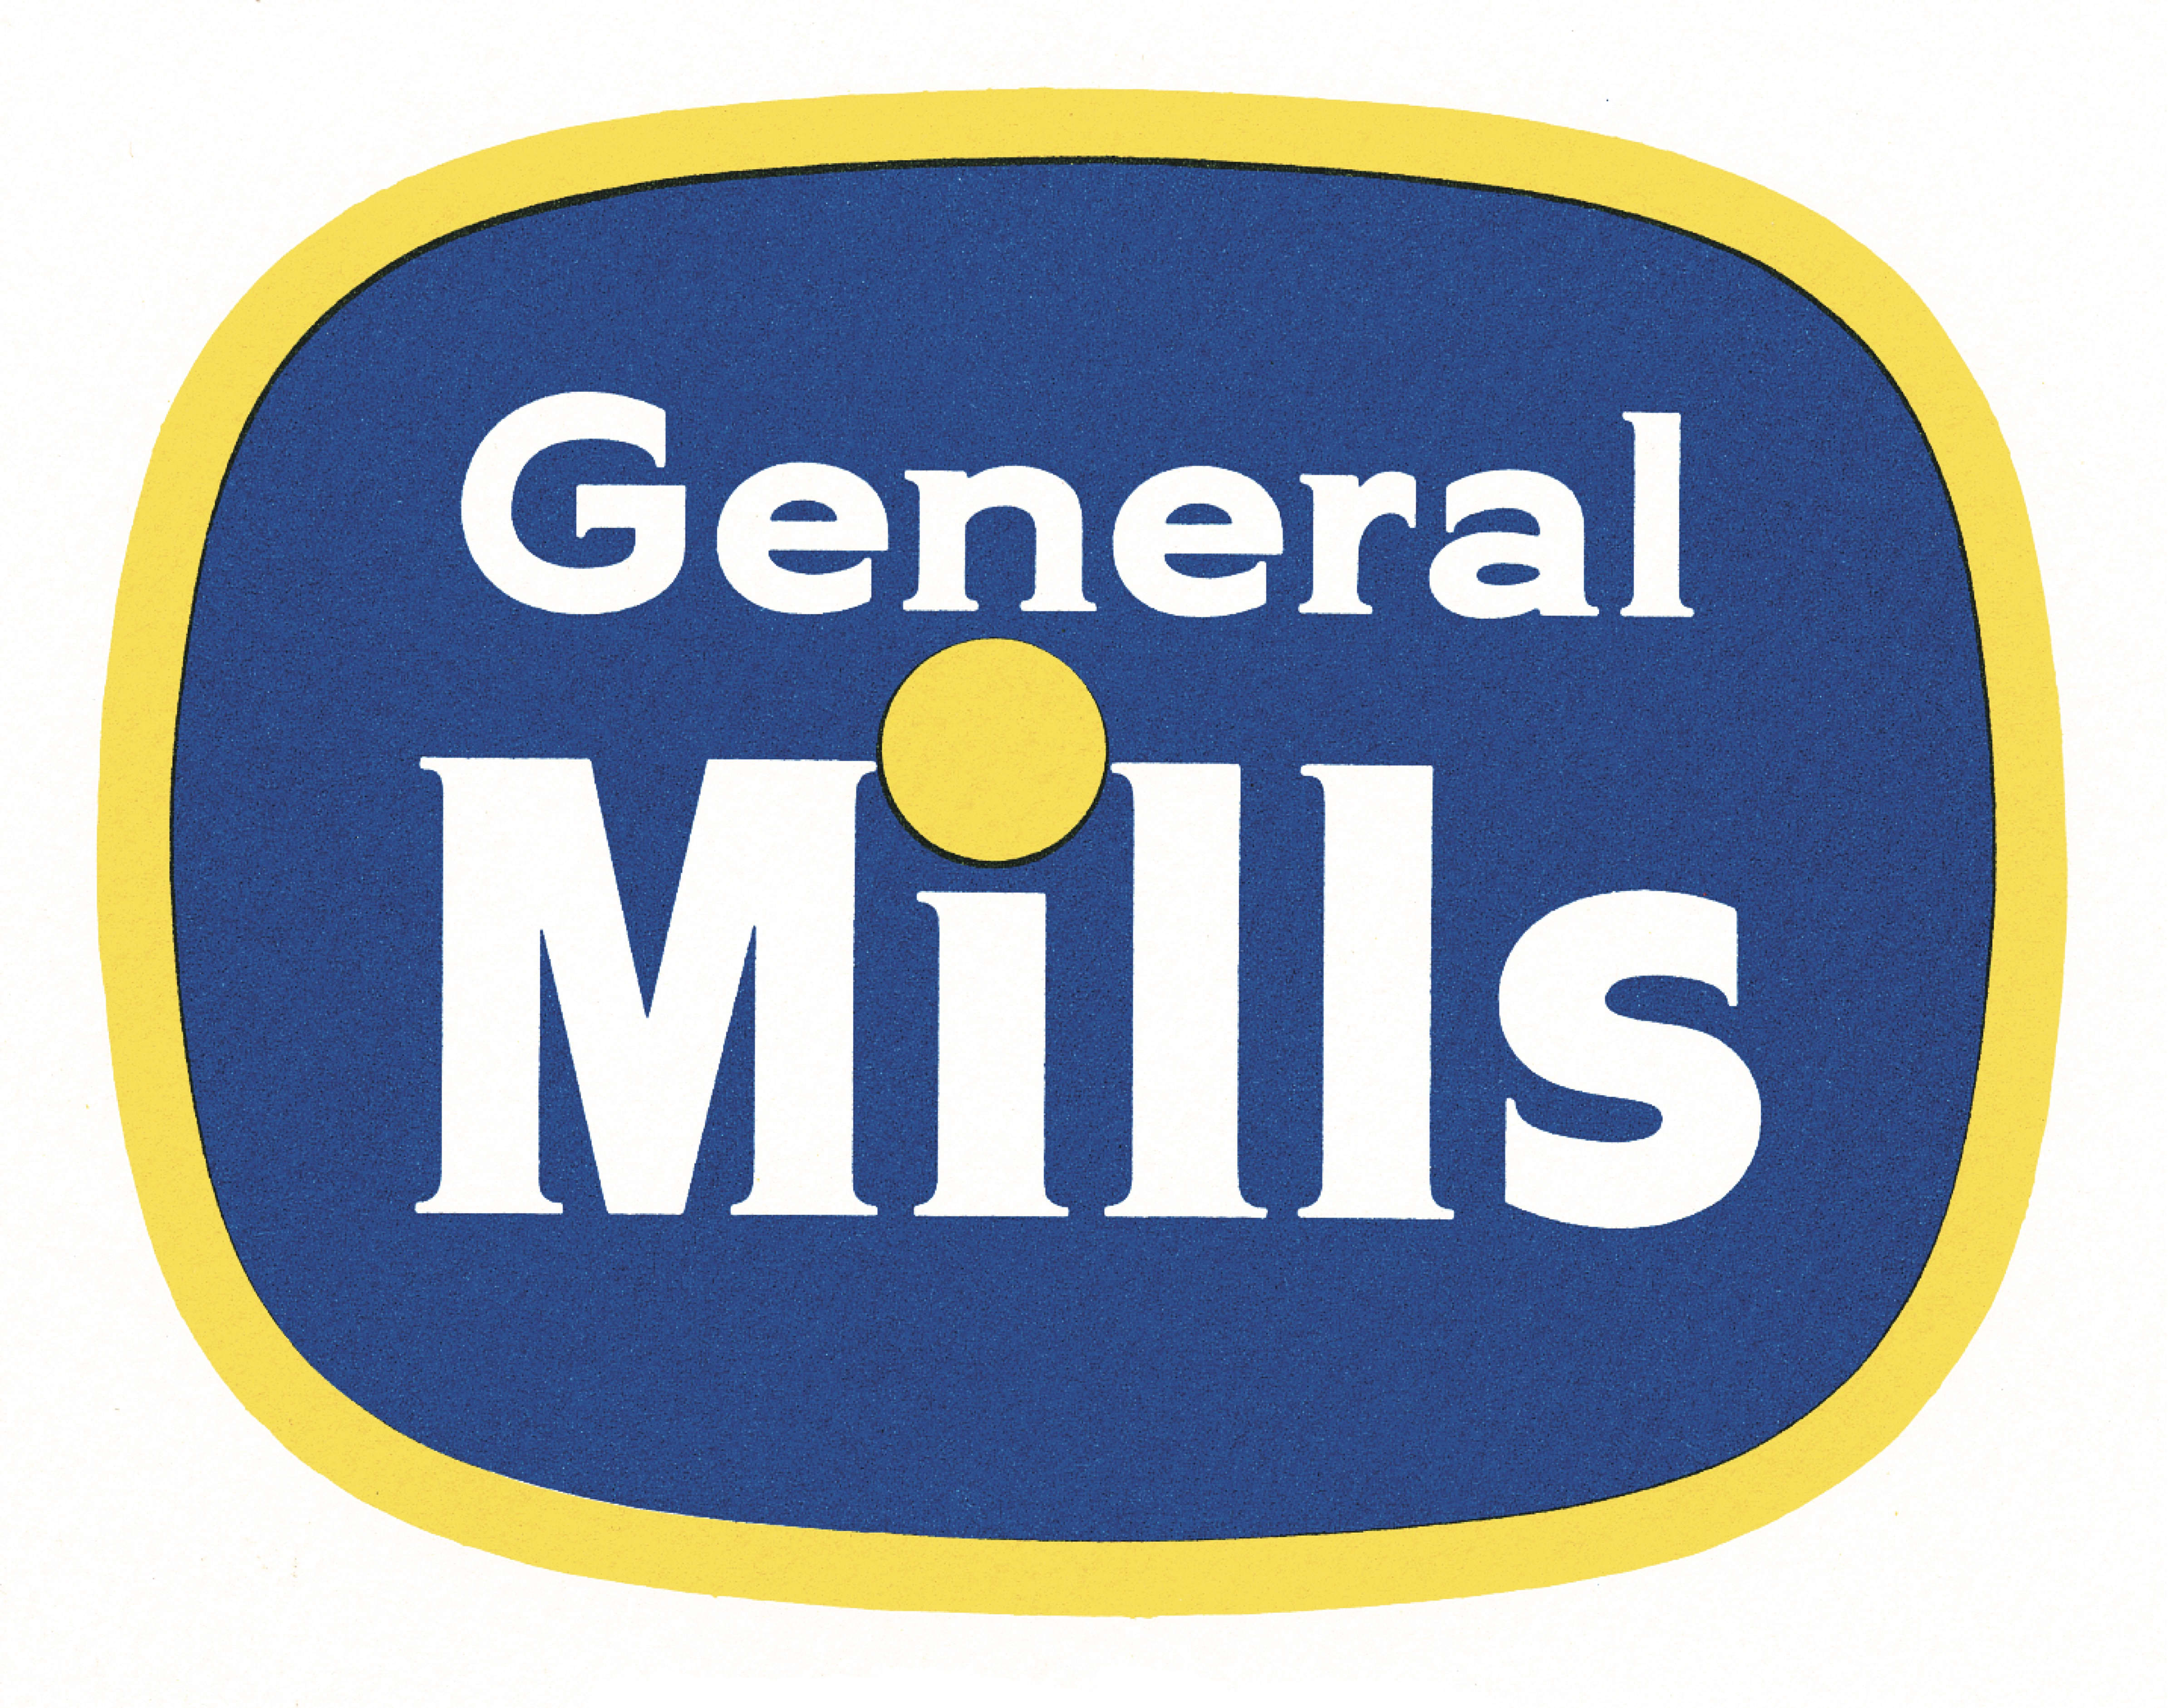 Our new logo tells an evolving story General Mills